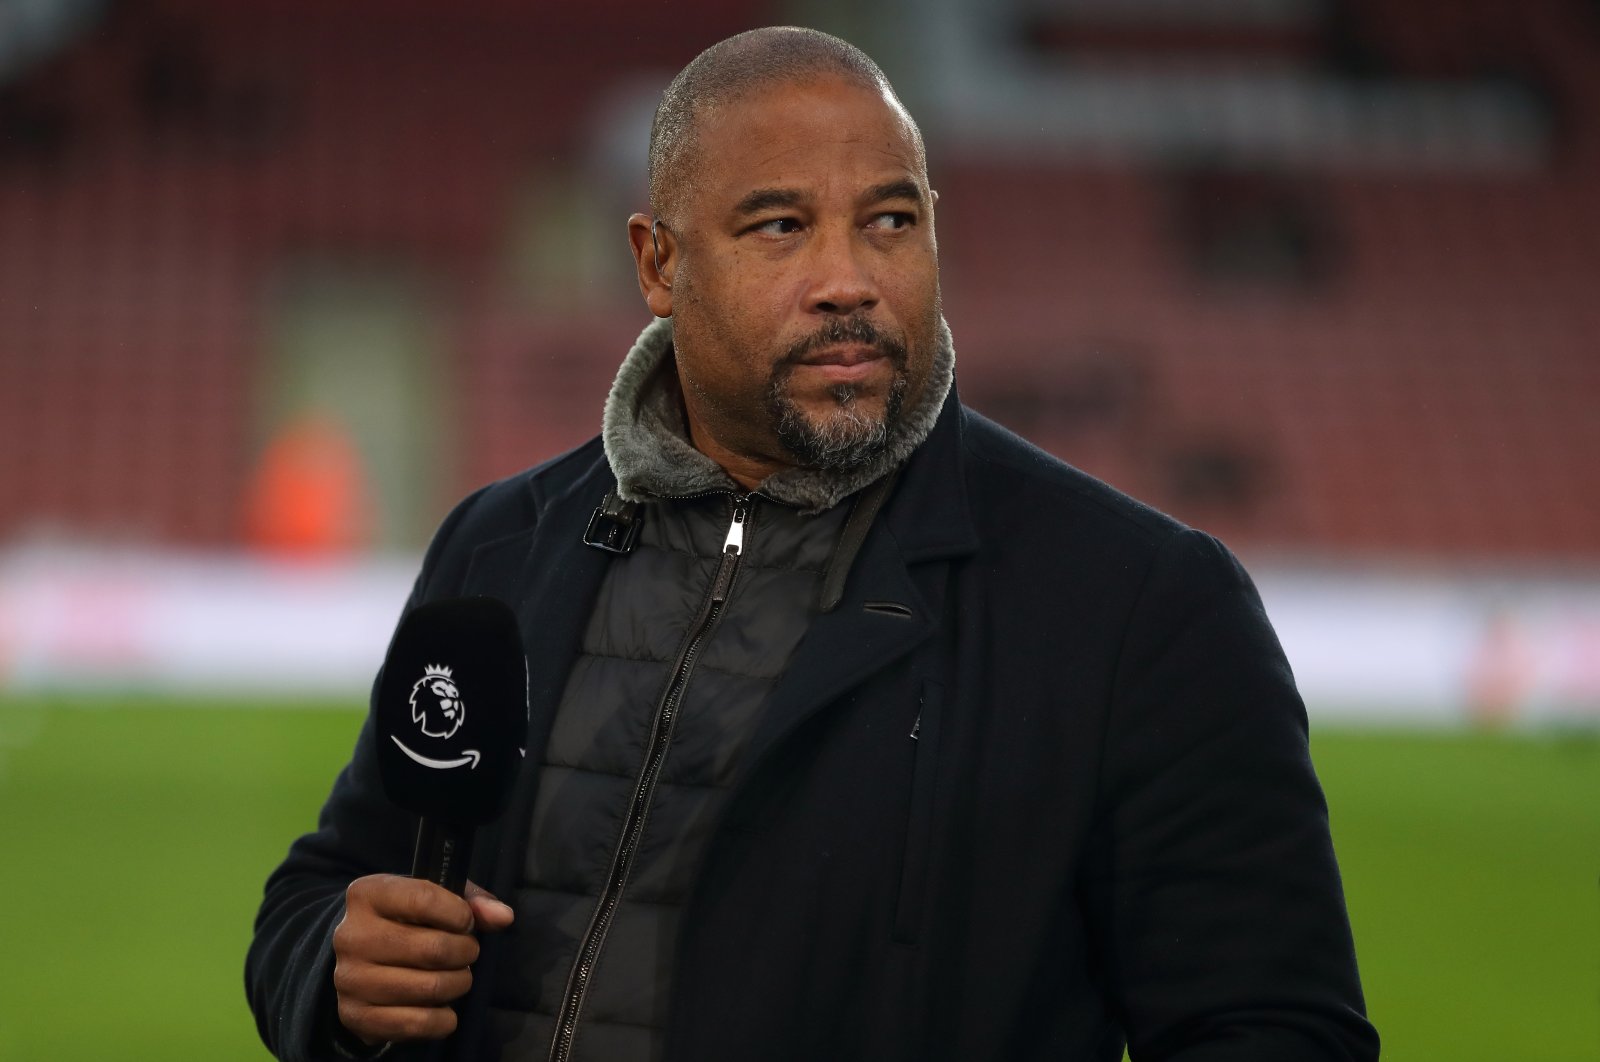 John Barnes working for Amazon Prime during the Premier League match between Sheffield United and Watford FC at Bramall Lane, Sheffield, U.K., Dec. 26, 2019. (Getty Images Photo)